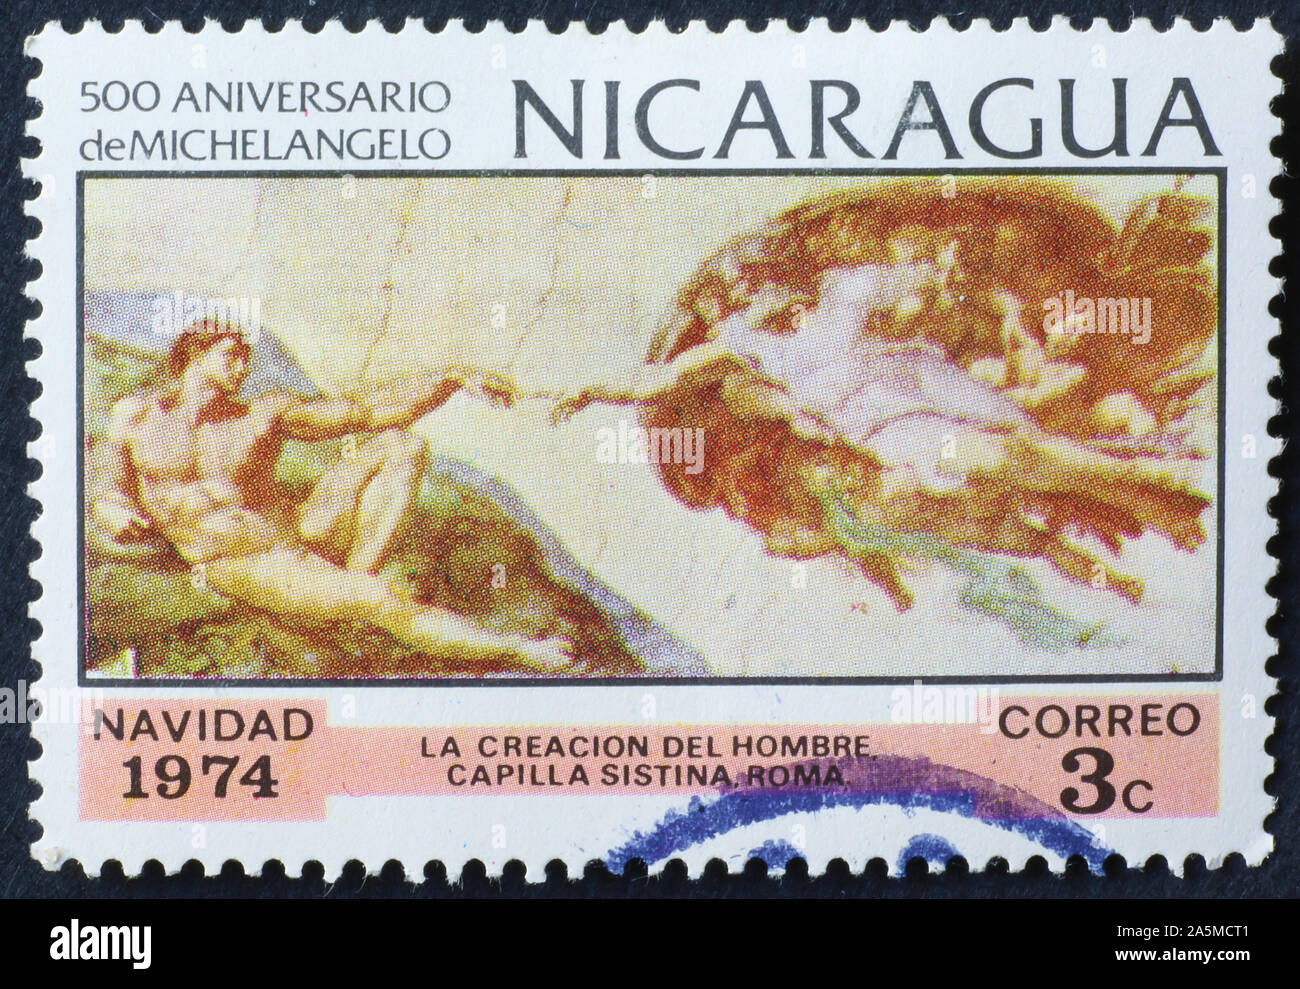 Creation of man by Michelangelo on postage stamp of Nicaragua Stock Photo